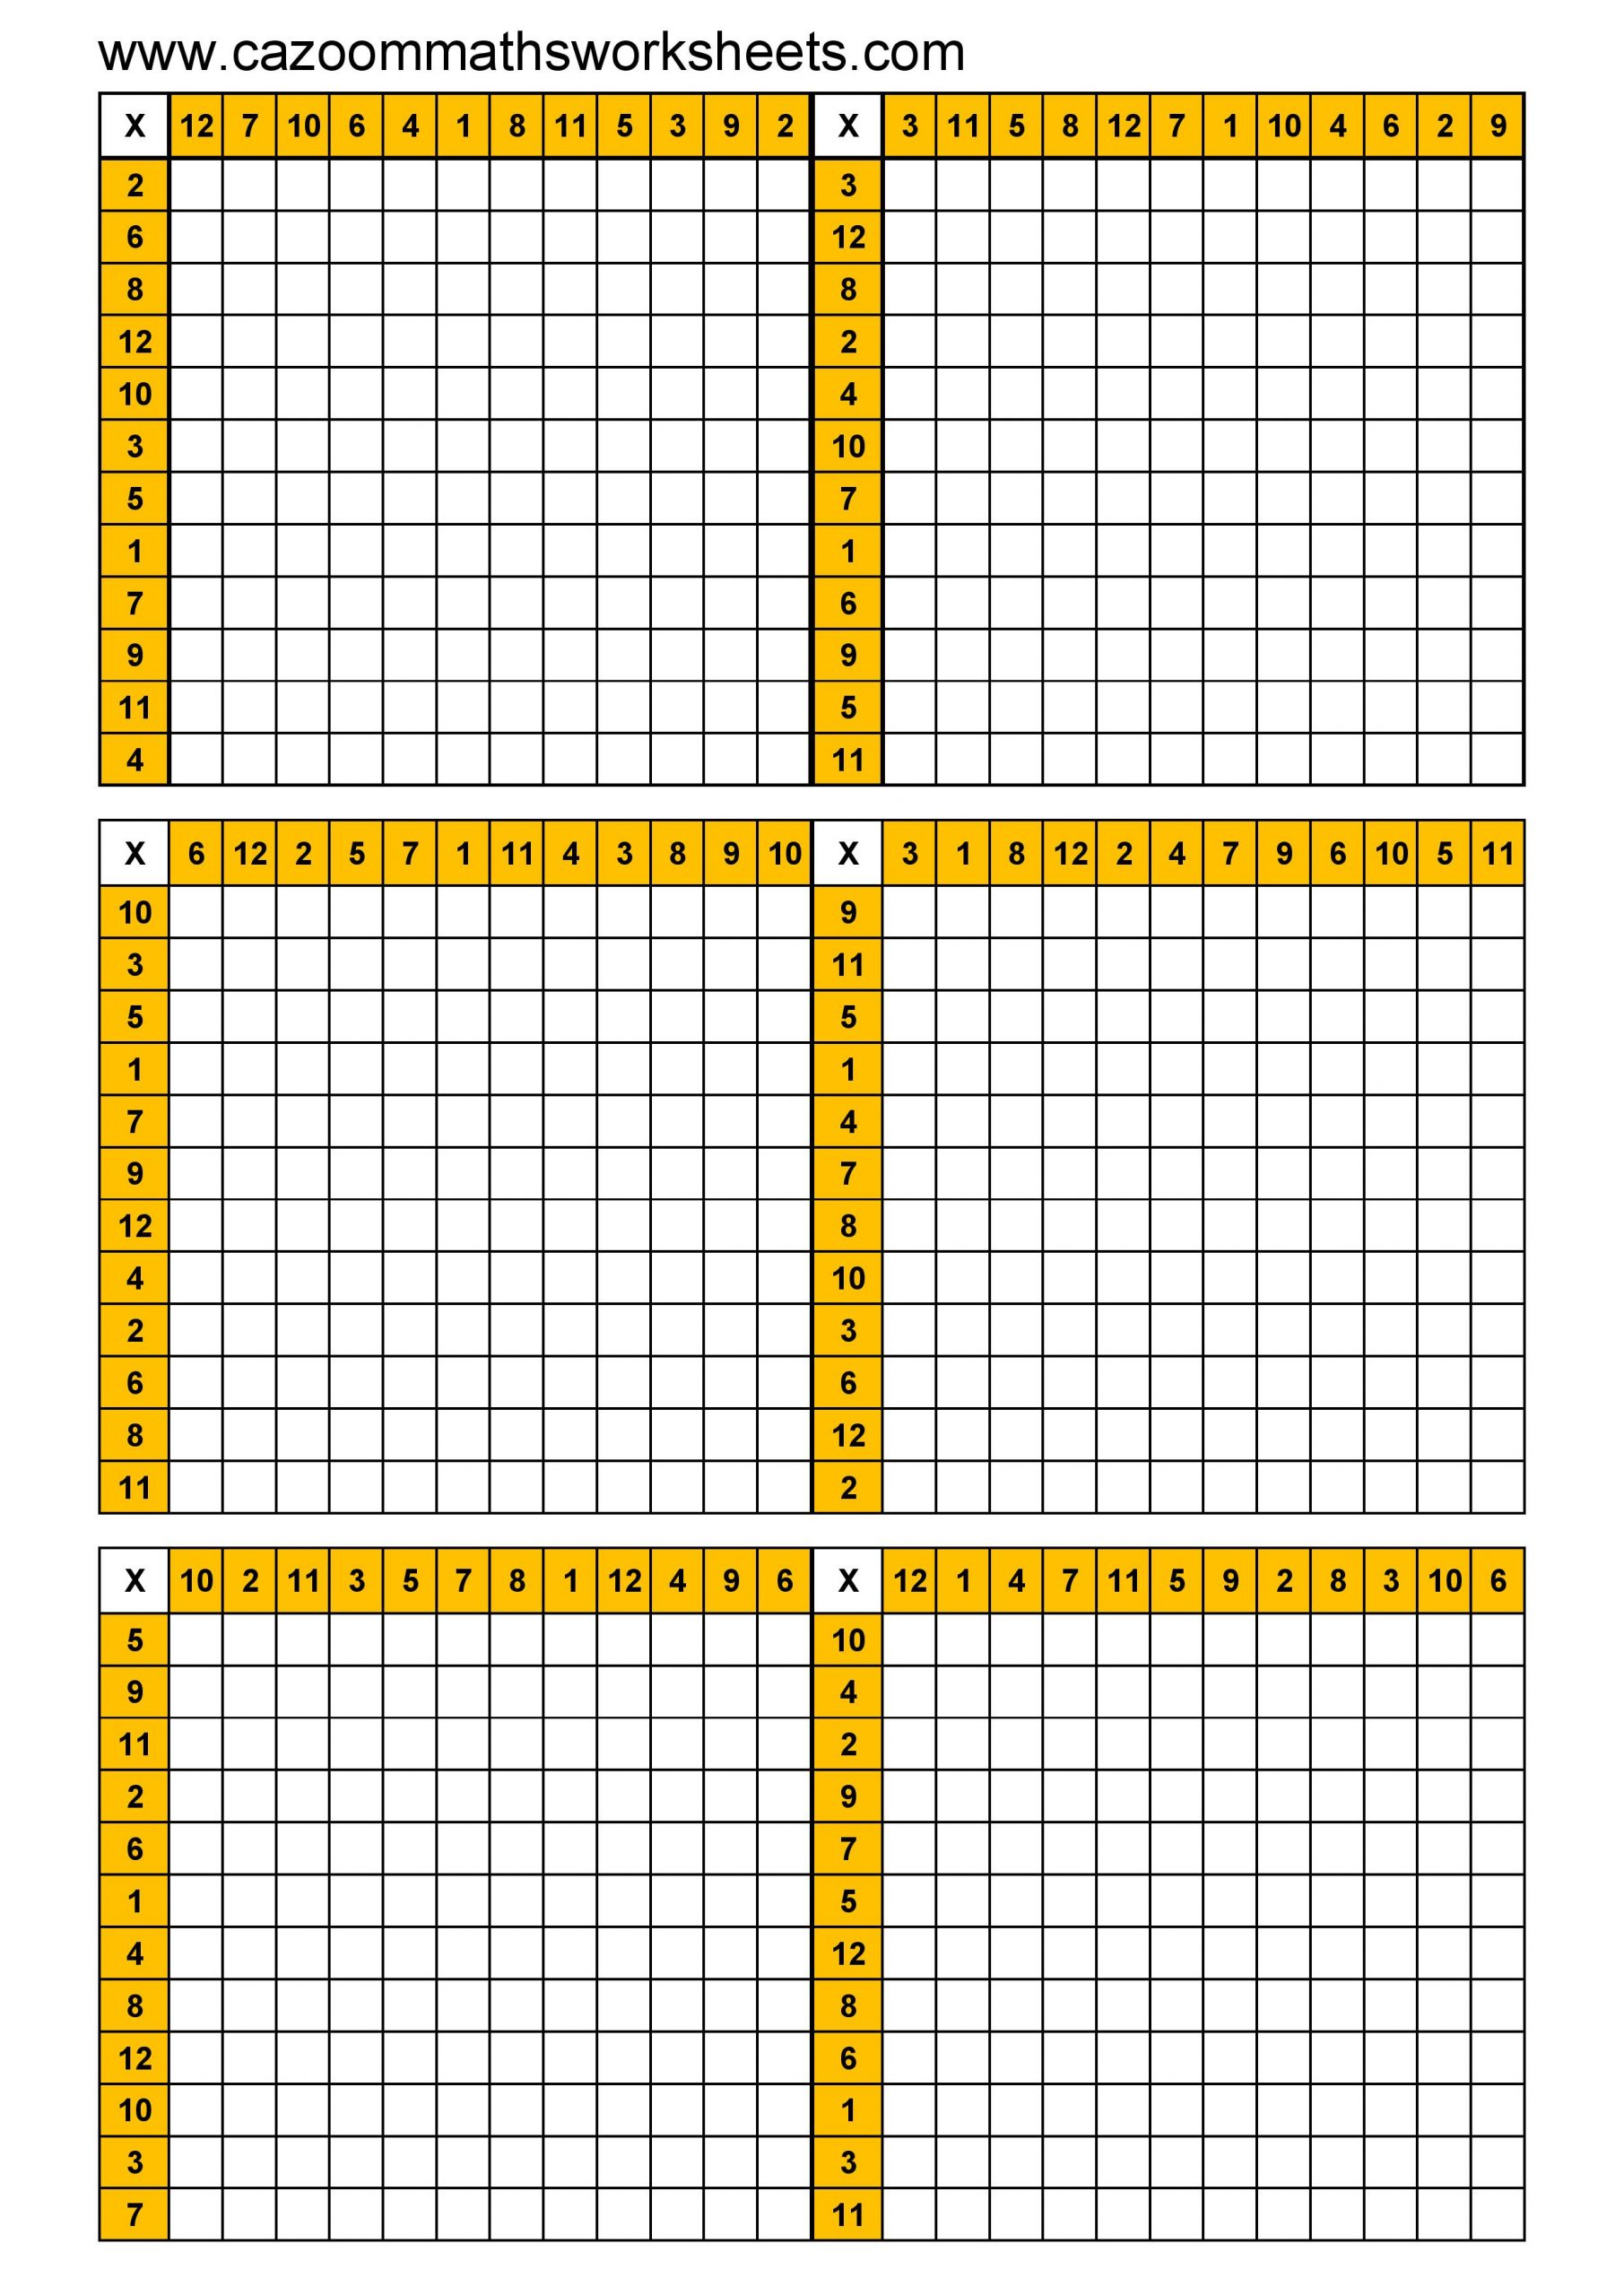 pin-on-math-worksheets-multiplication-times-tables-official-mini-poster-multiplication